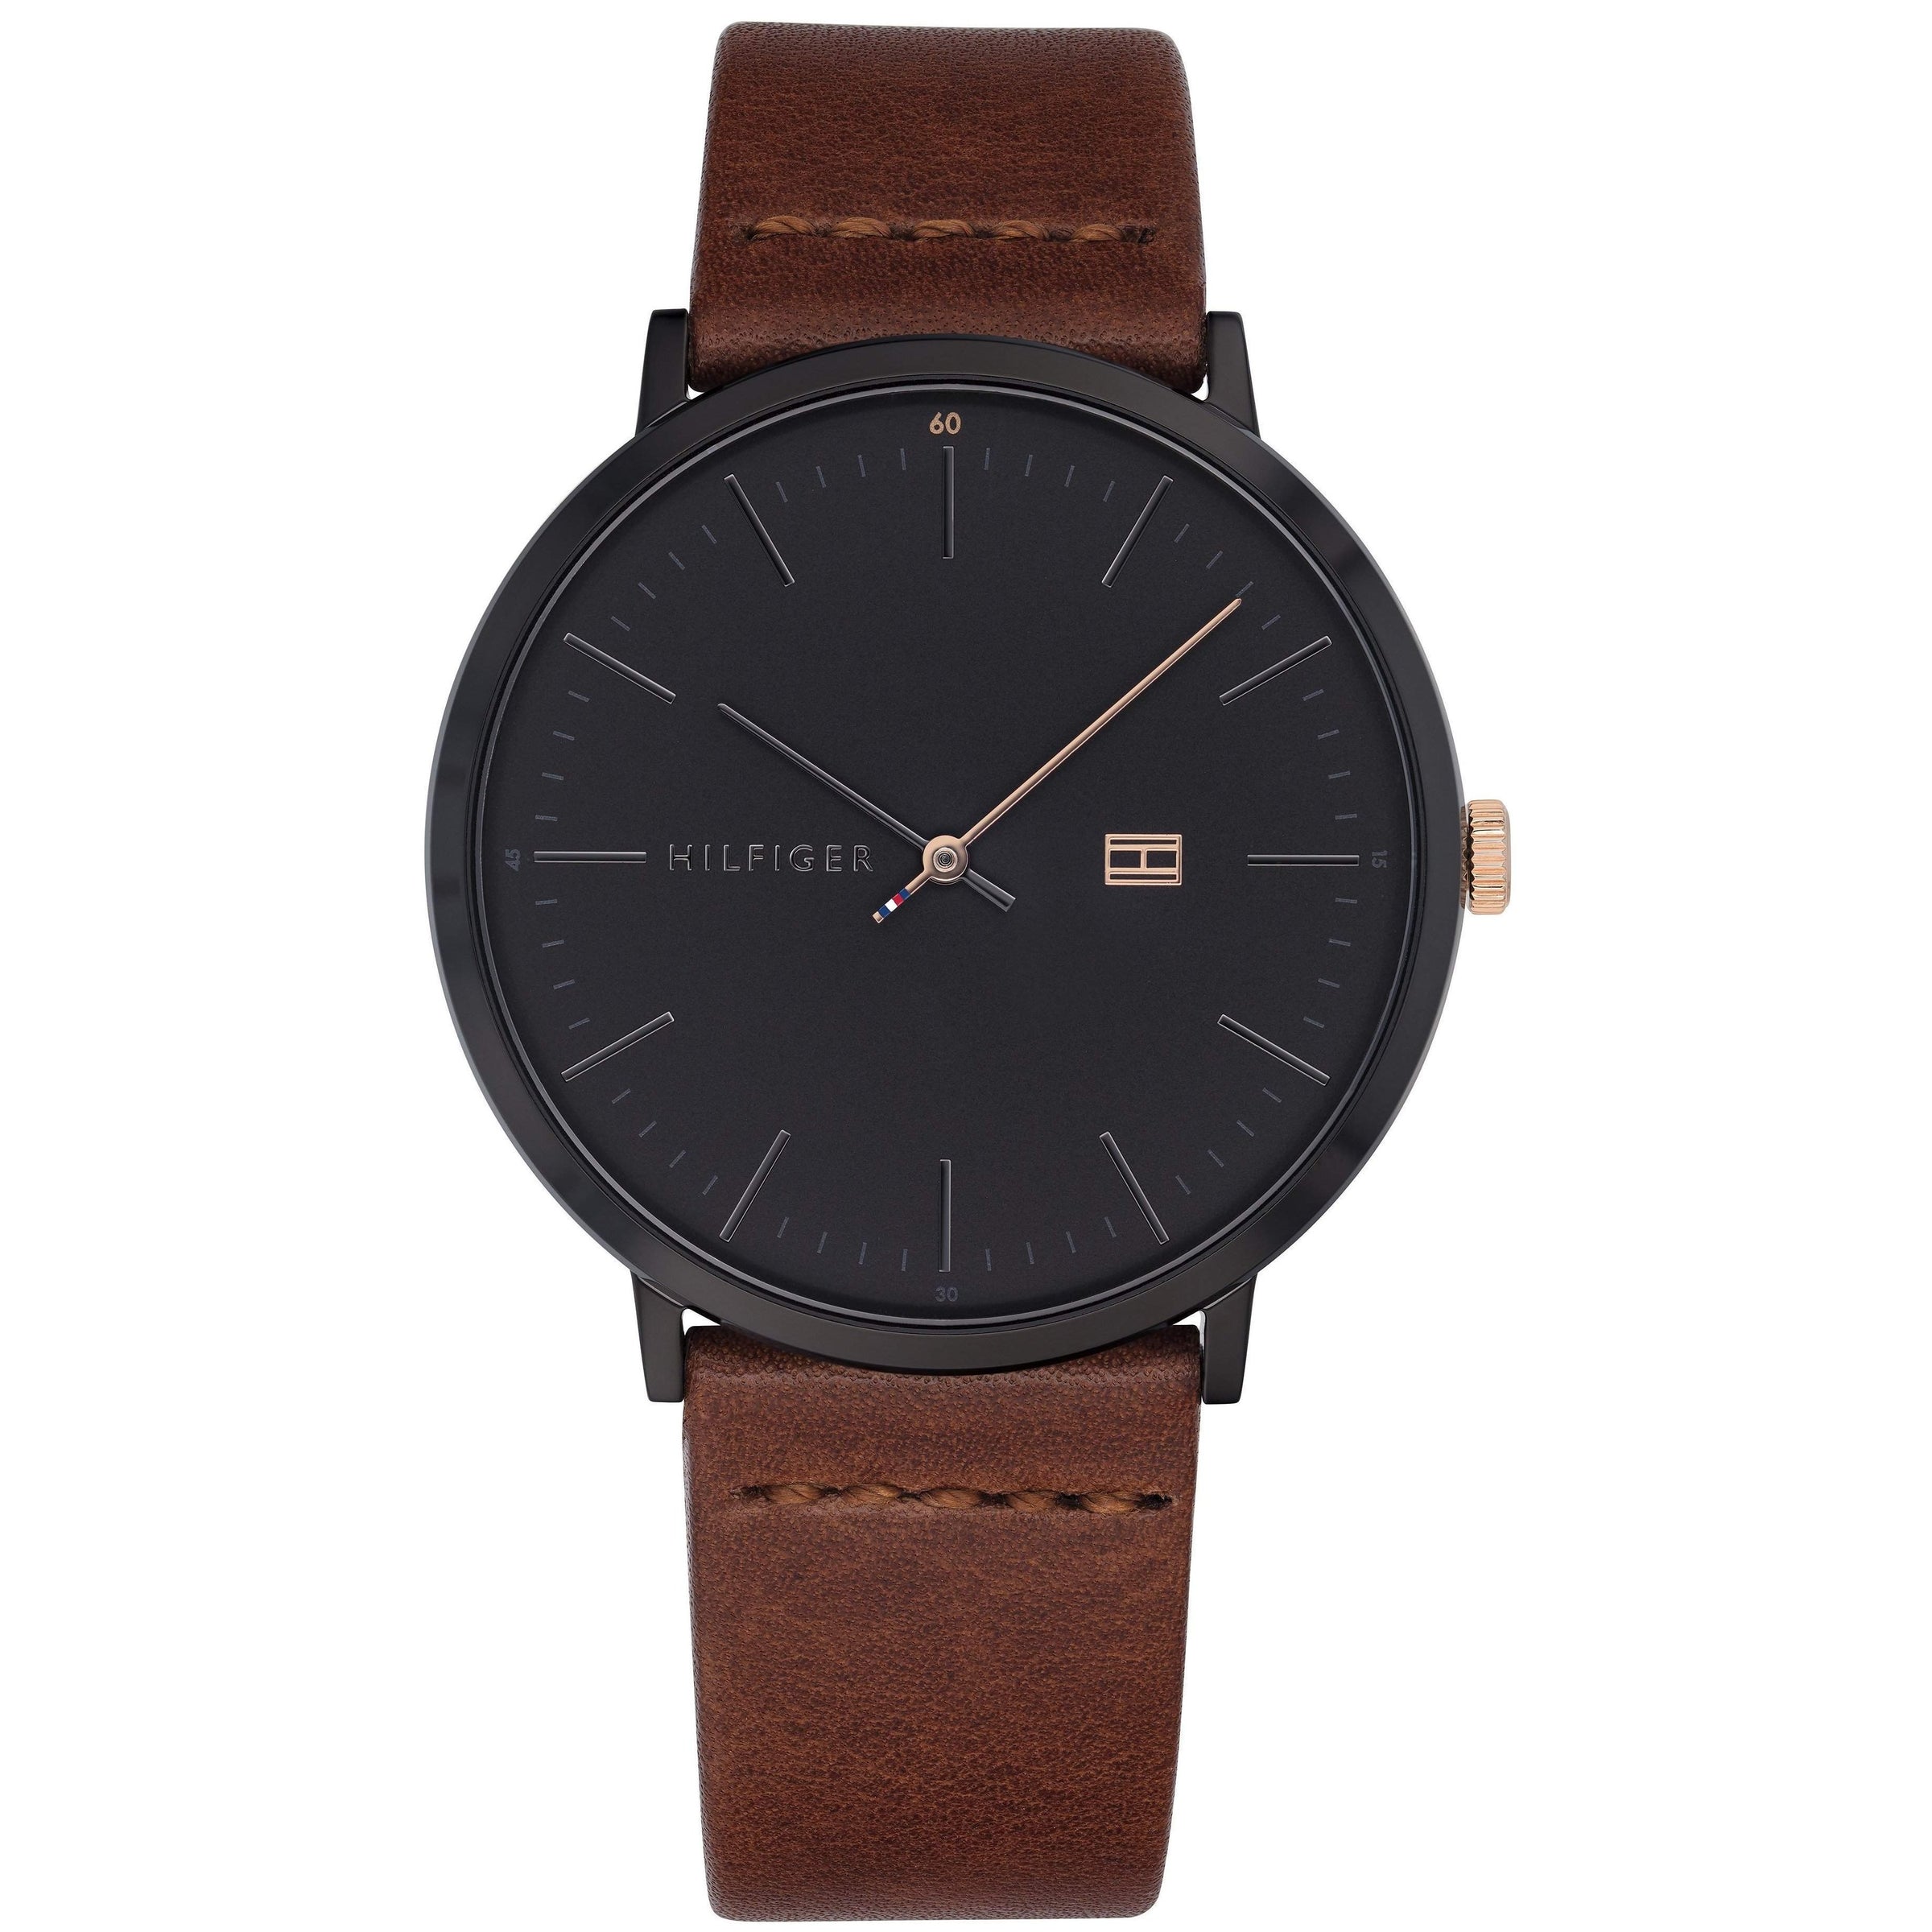 tommy hilfiger brown leather watch